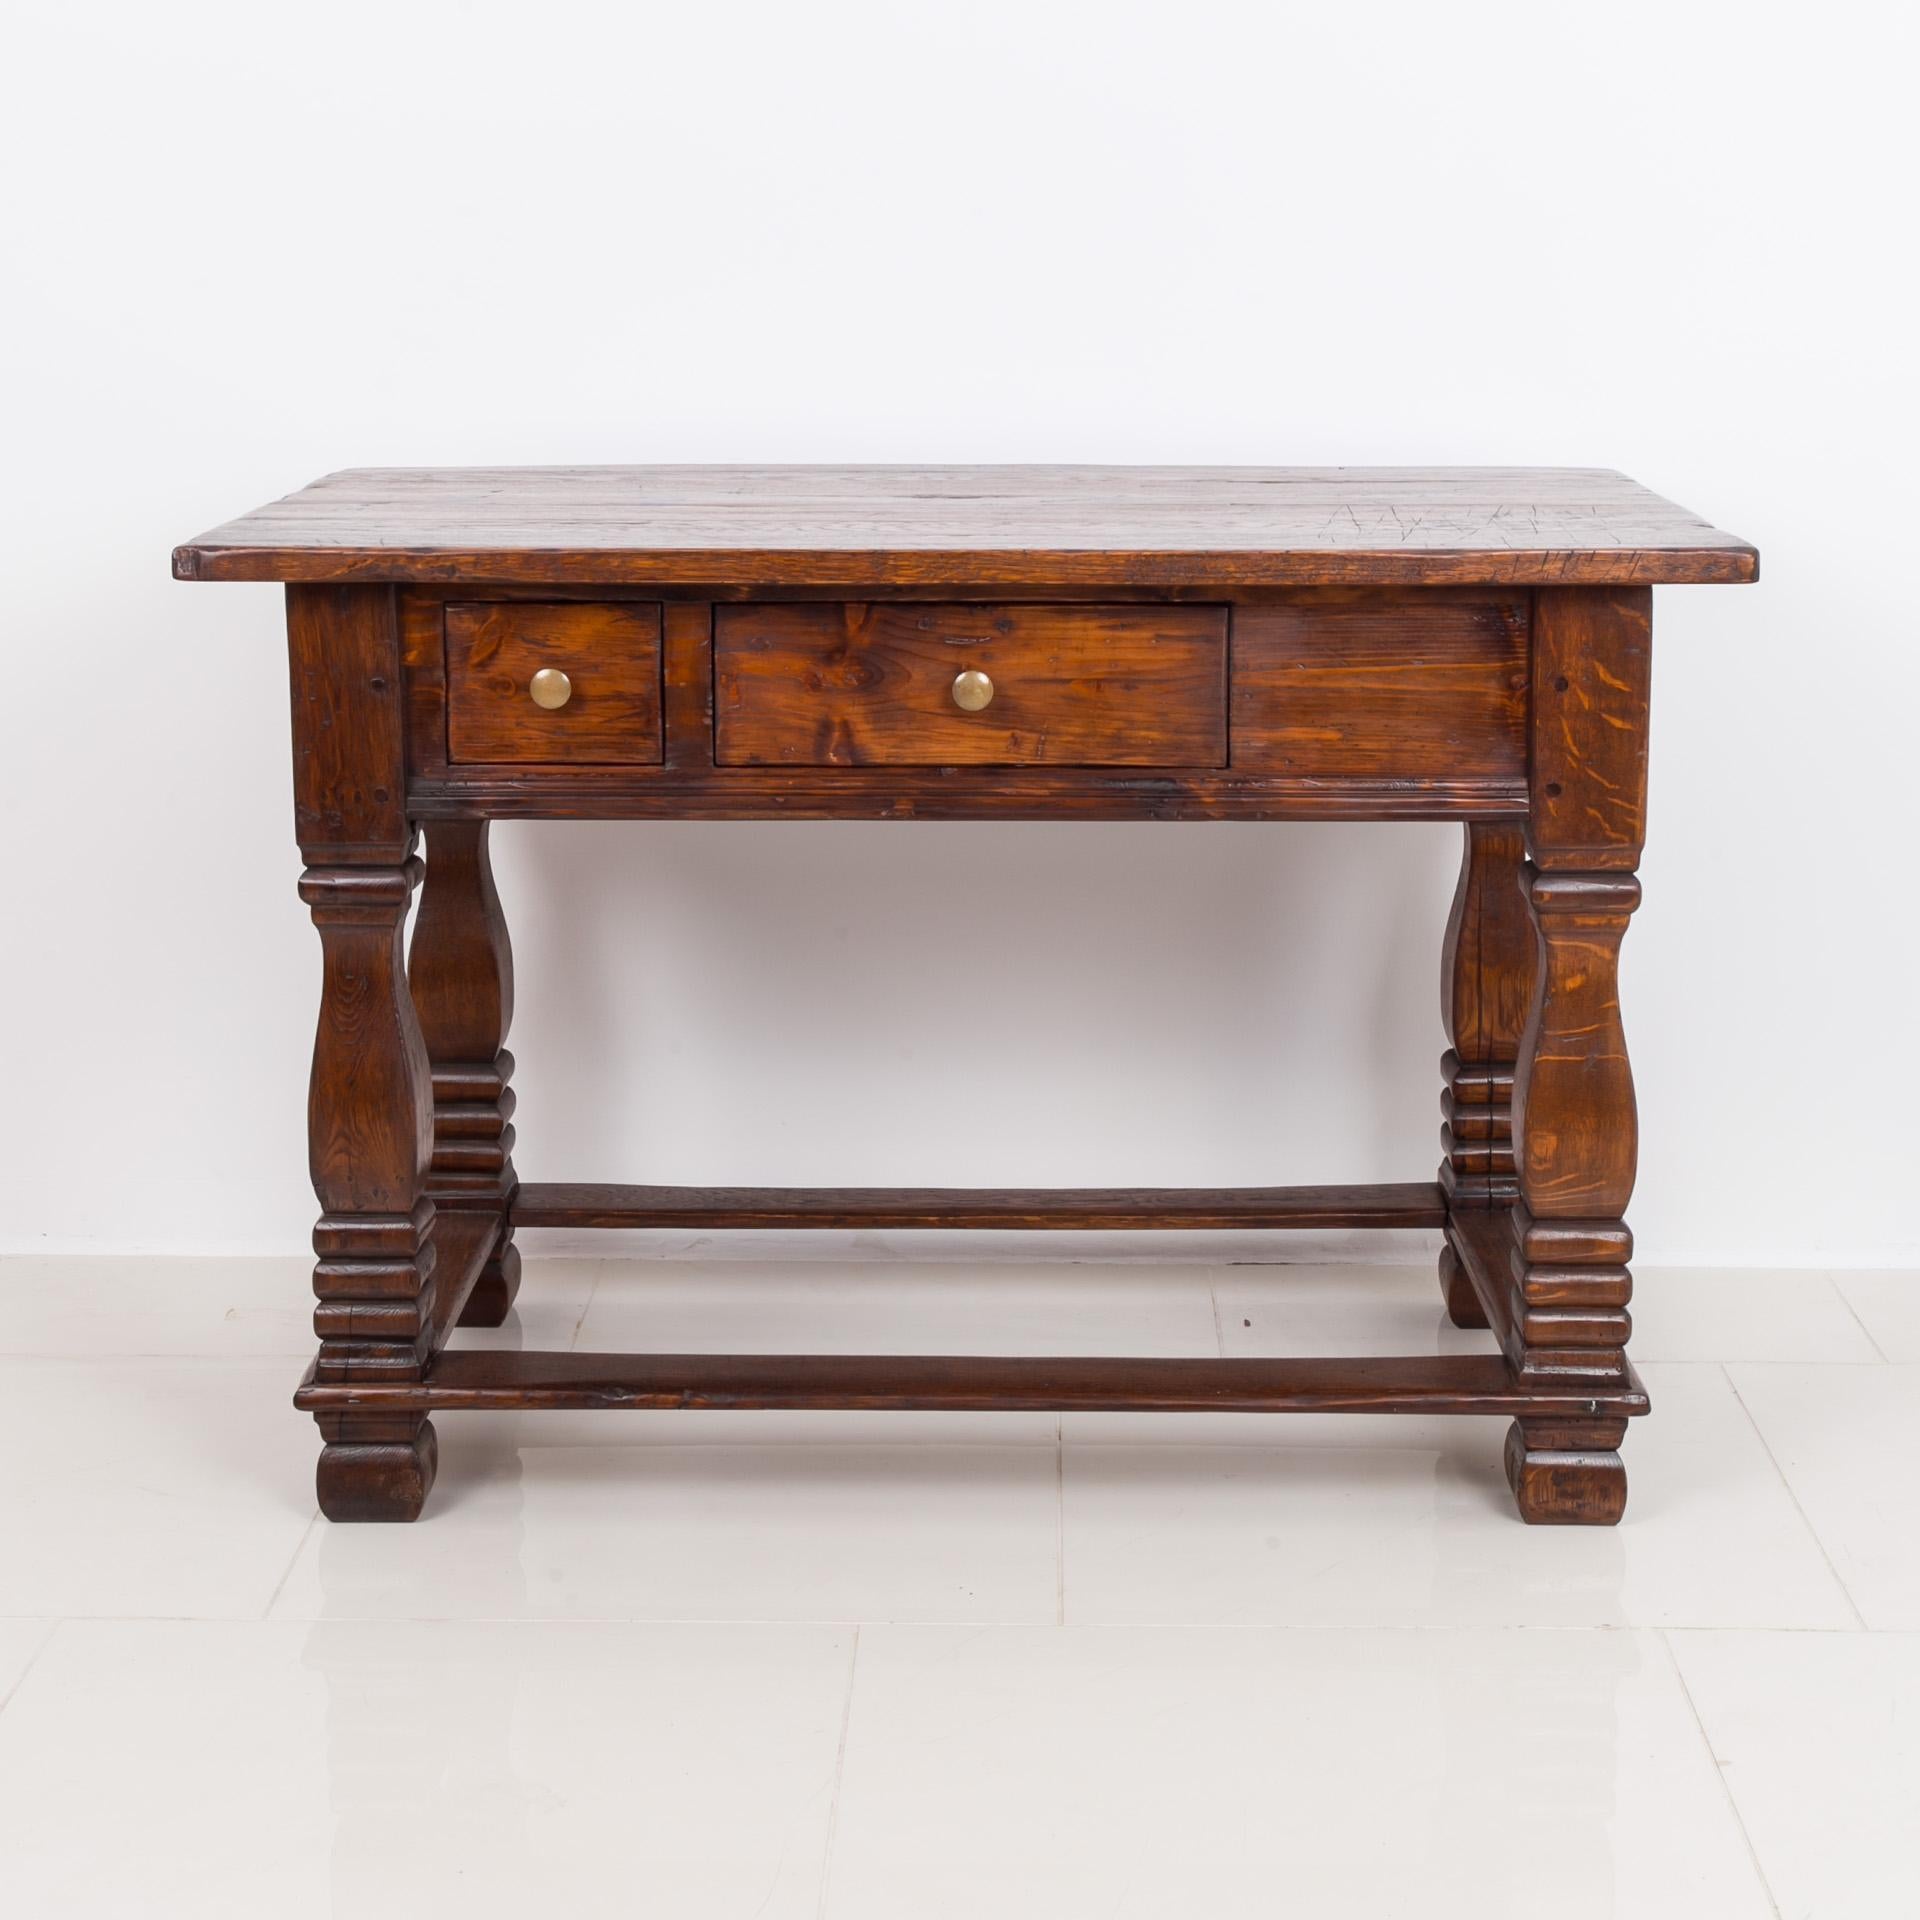 Solid Oak Table, 18th / 19th Century, Rustic Style, Prep or Dining Table 4